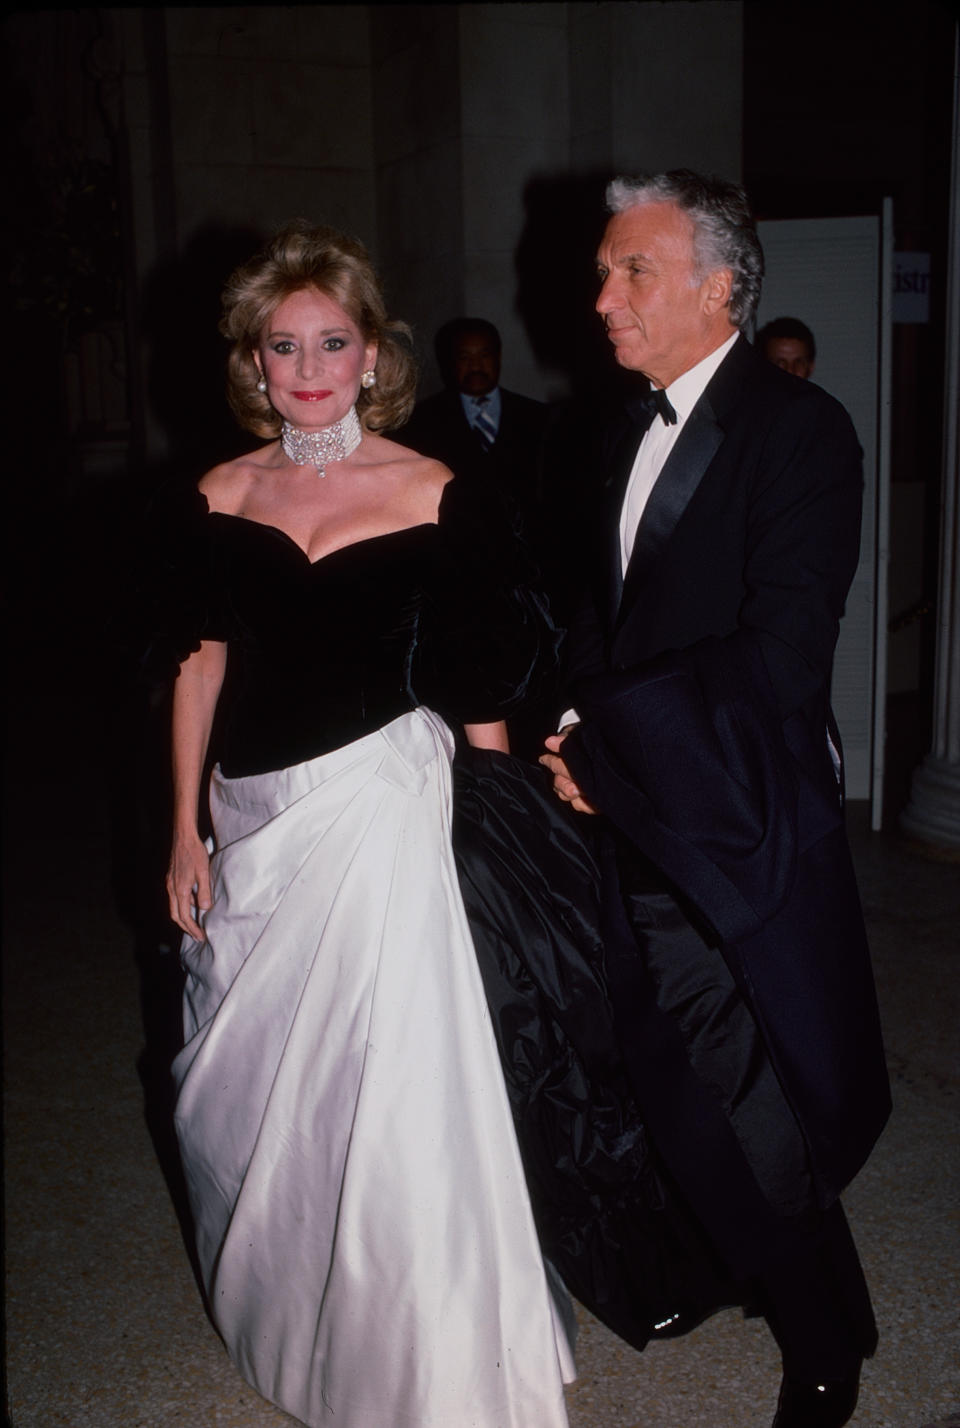 Married American couple, broadcast journalist Barbara Walters (1929 - 2022) and businessman & tv producer Merv Adelson (1929 - 2015), attend the Met Gala at the Metropolitan Museum of Art, New York, New York, December 8, 1986. 